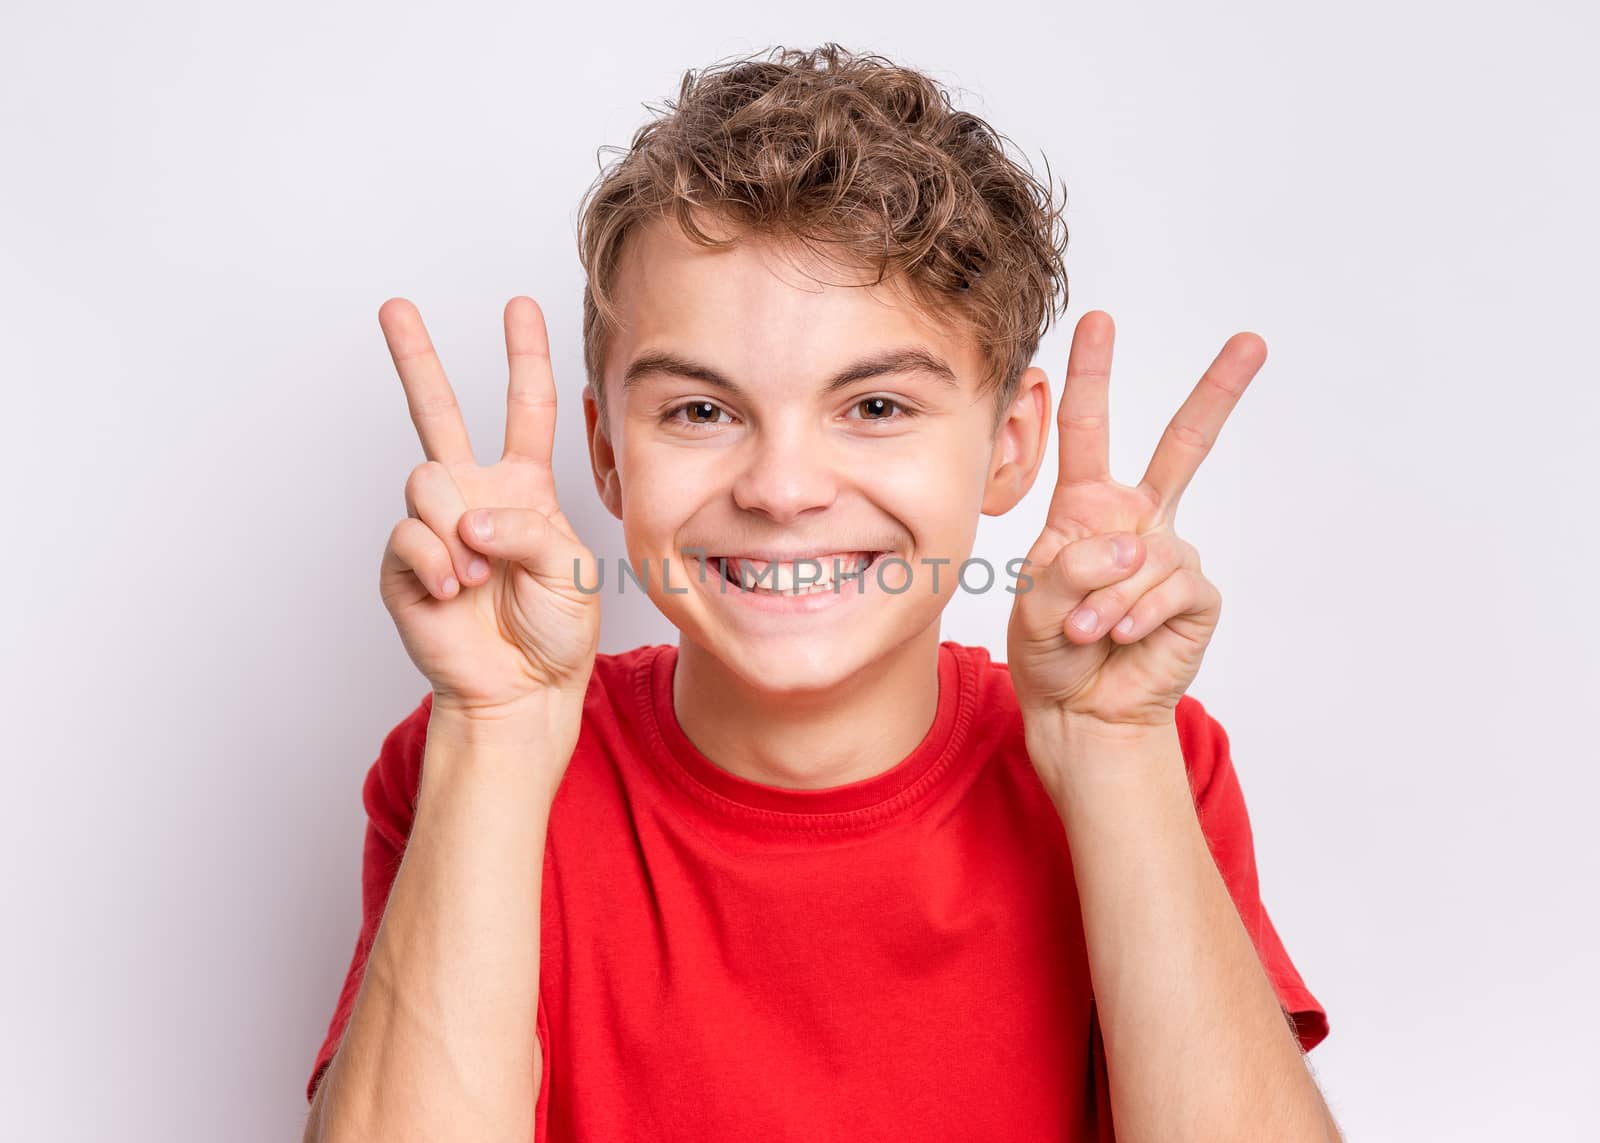 Portrait of teen boy making Victory gesture, on grey background. Handsome caucasian young teenager smiling and showing victory sign. Happy cute child doing victory symbol.